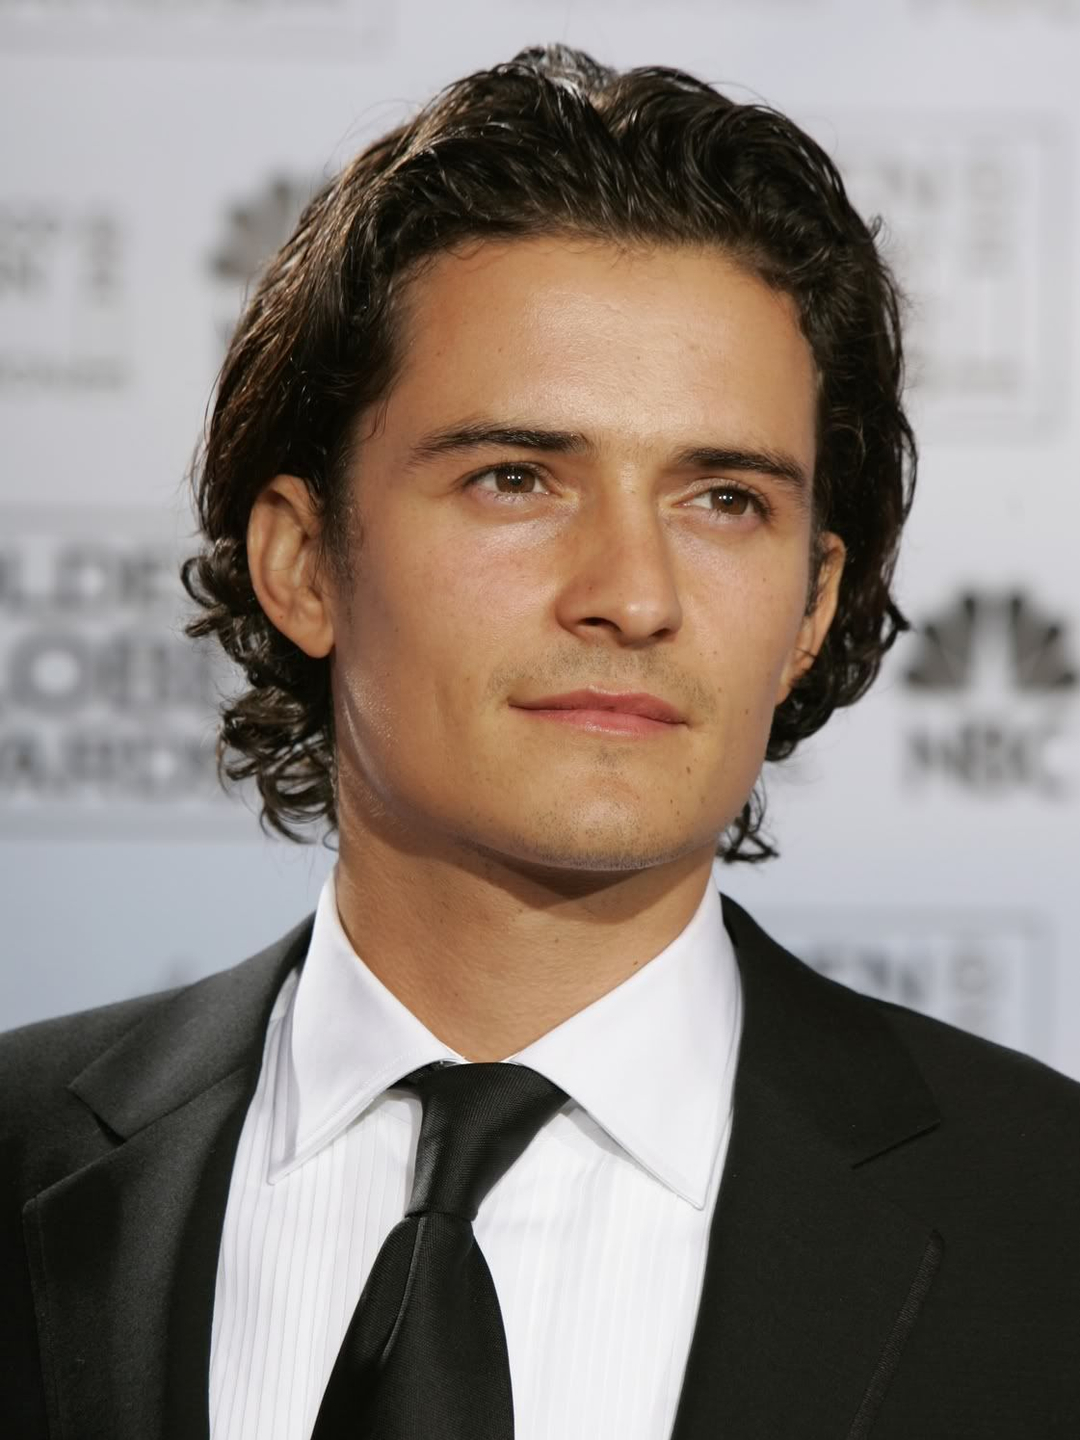 Orlando Bloom does he have a wife